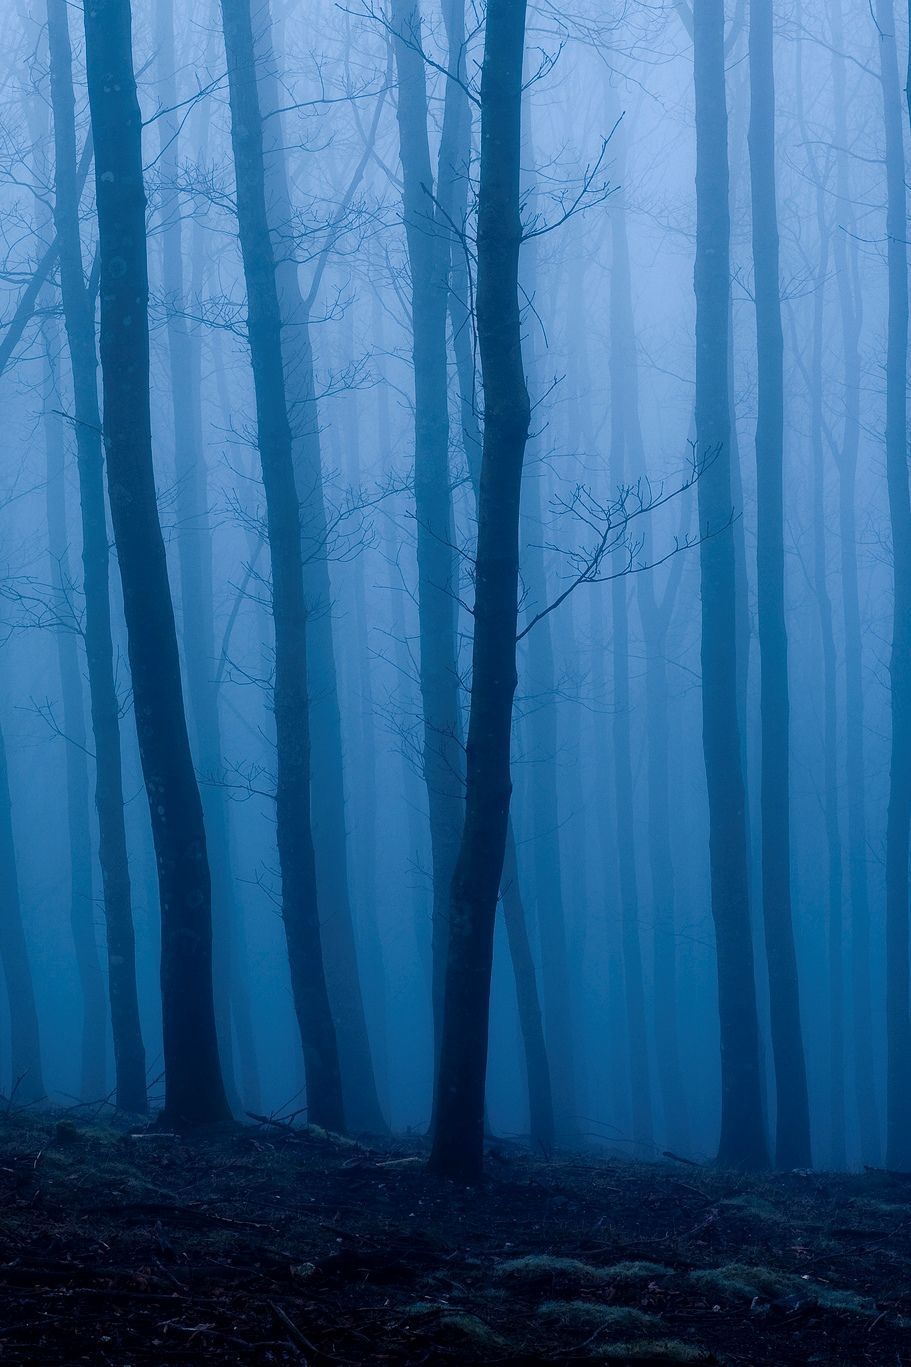 So Dreamy Like. 0rient Express: Untitled. By Oskar Zapirain. Blue Aesthetic, Blue Forest, Ravenclaw Aesthetic